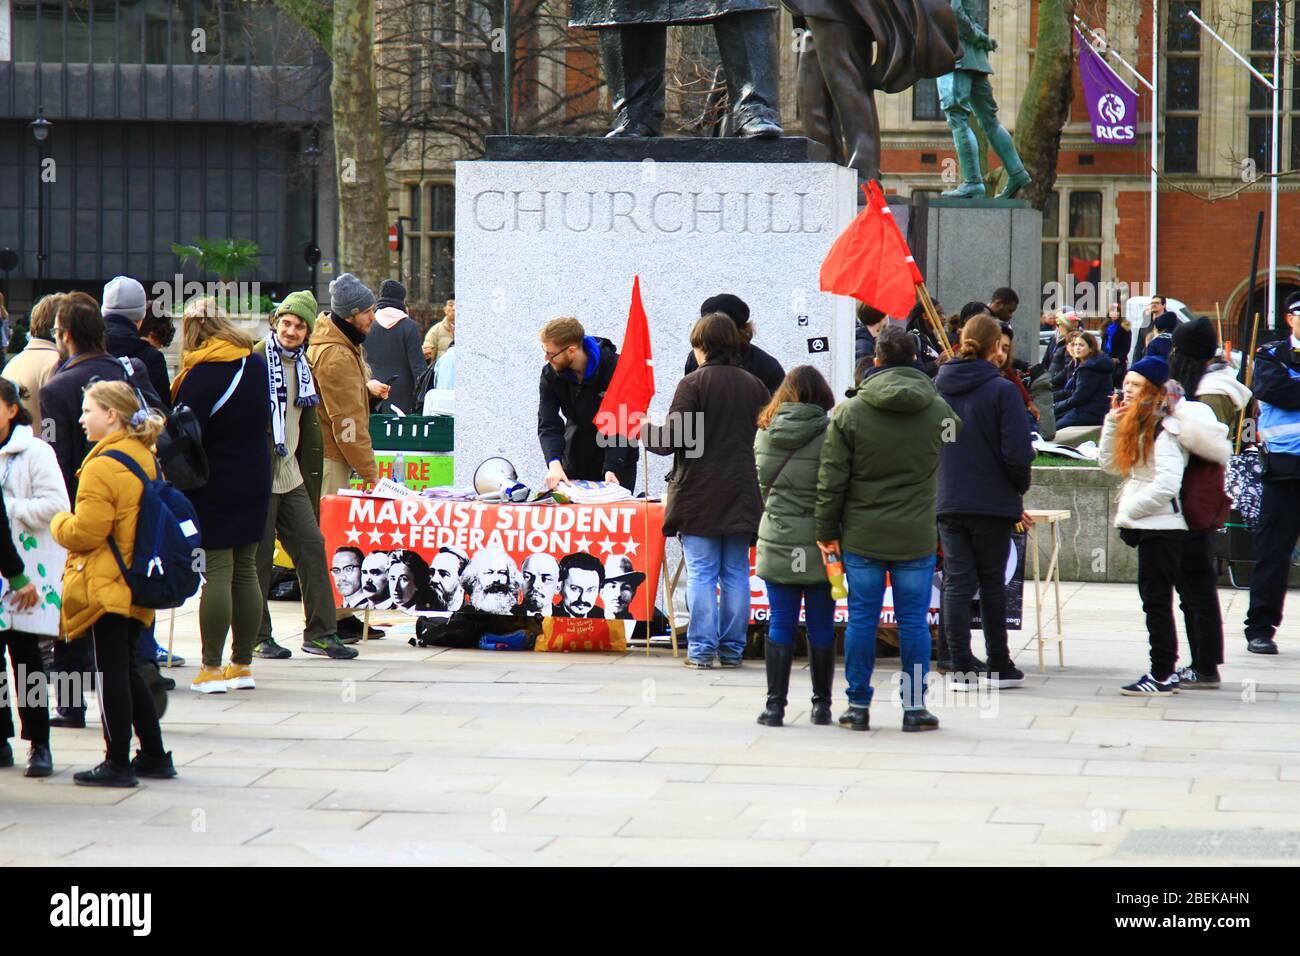 MARXIST STUDENT FEDERATION. BANNER ADVERTISING MARXIST STUDENT FEDERATION STAND BY CHURCHILL STATUE IN PARLIAMENT SQUARE, WESTMINSTER, LONDON, ENGLAND UNITED KINGDOM. MARXISM. Stock Photo